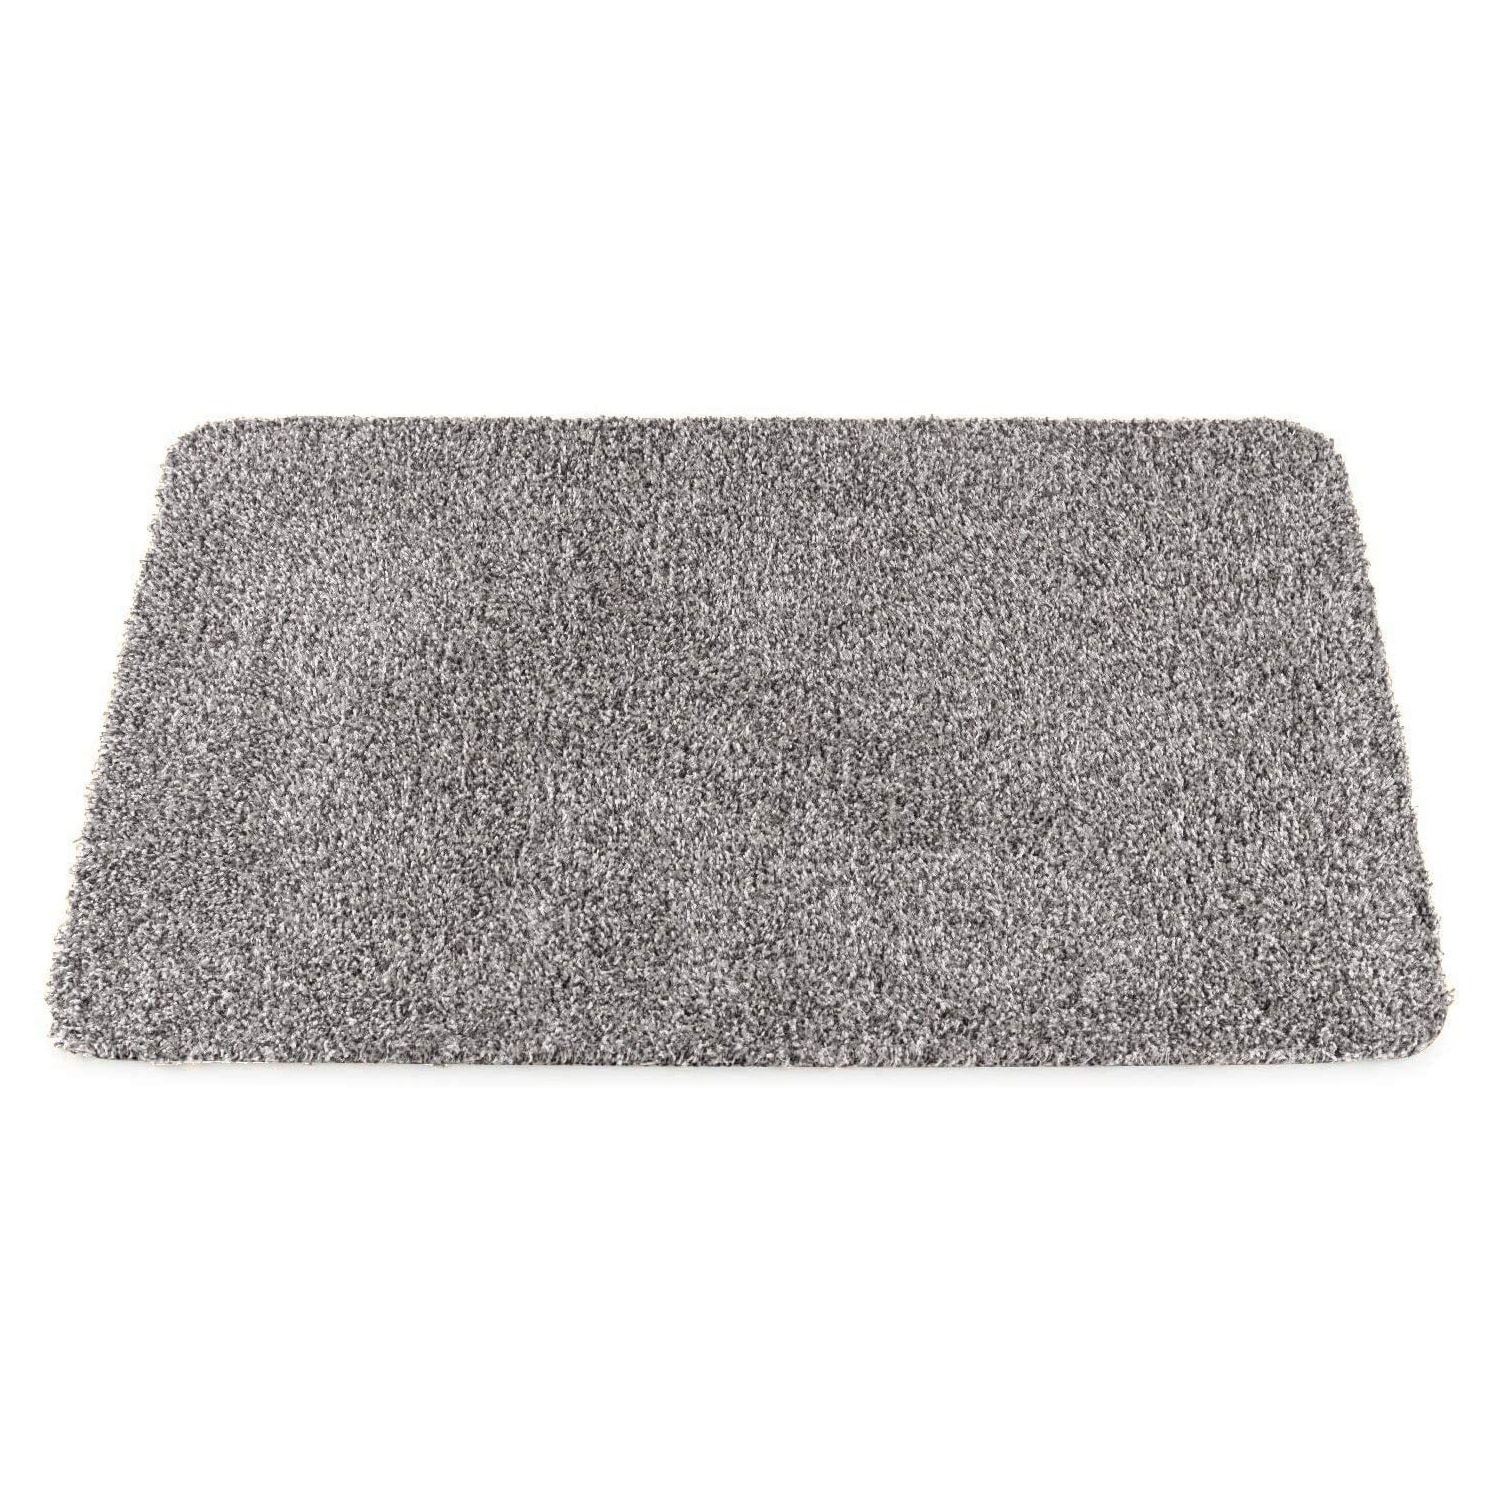 https://ak1.ostkcdn.com/images/products/is/images/direct/78b4c69ae37959e60eaa3417e4fc8cbacfedc223/Door-Mat%2C-Entry-Rug%2C-Super-Absorbent%2C-20-X-30.jpg